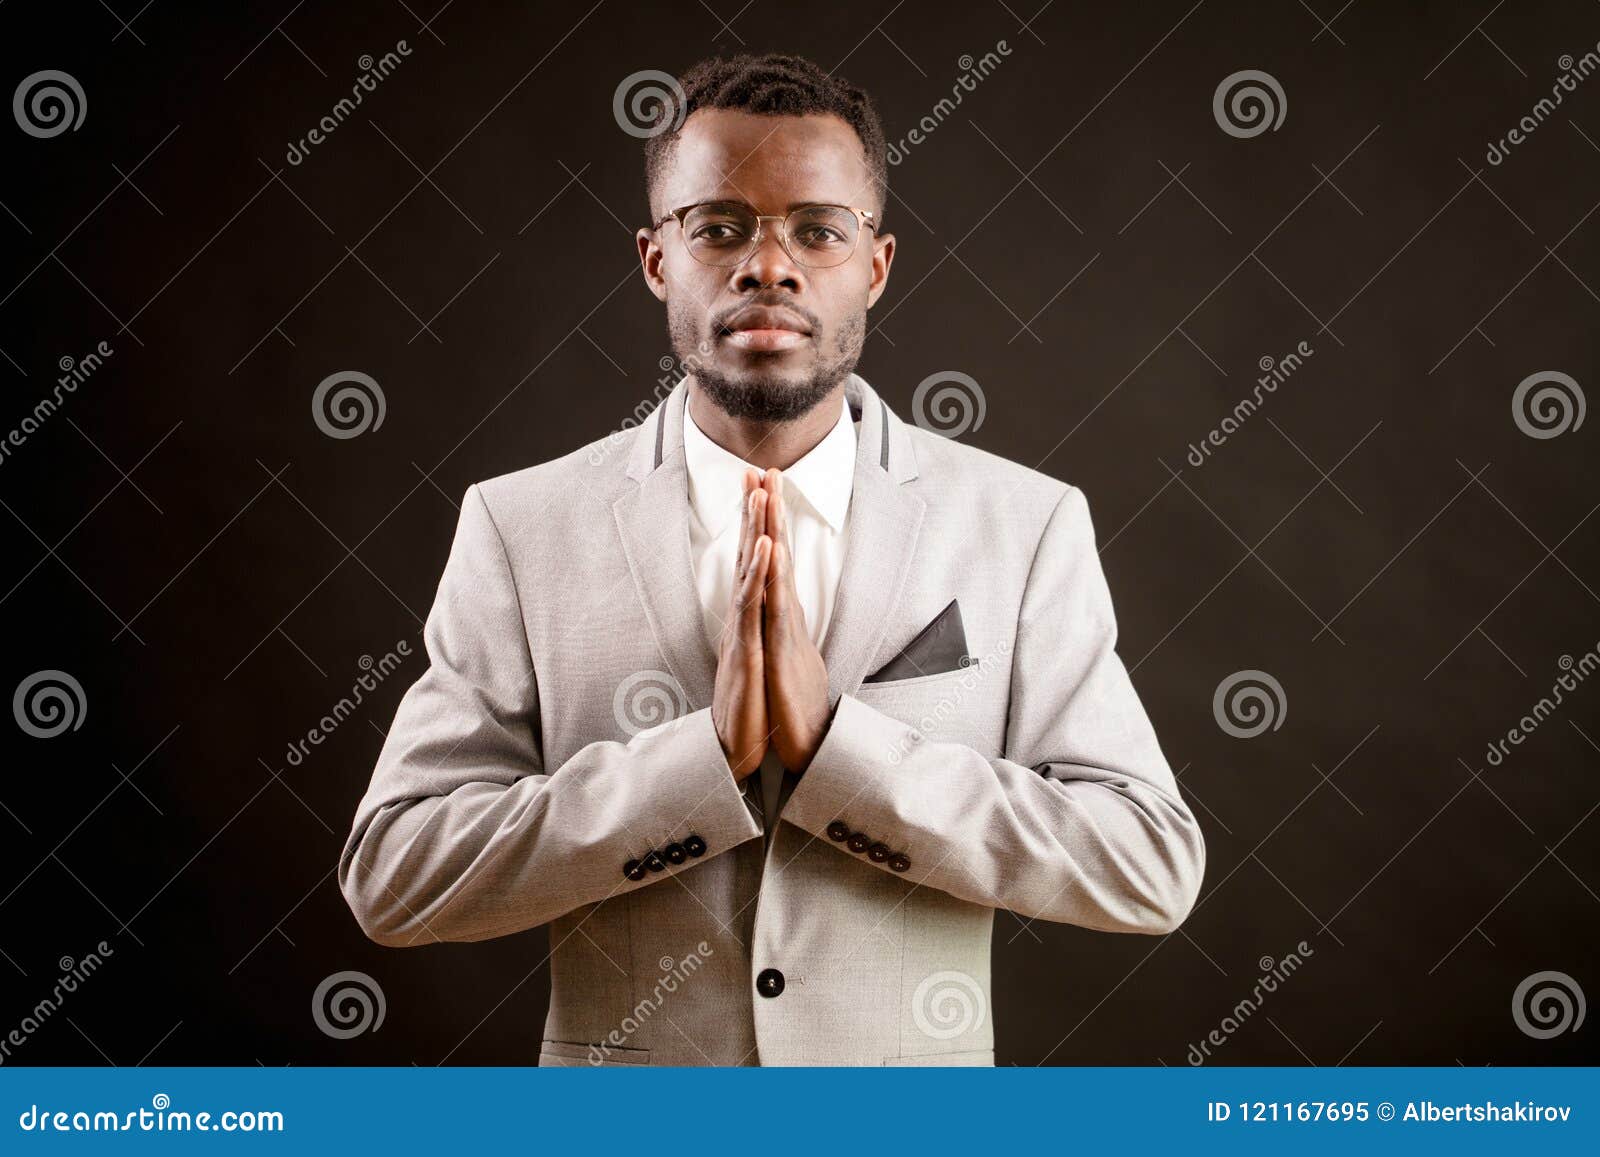 praying africanamerican man in good clothing. ask the god for health